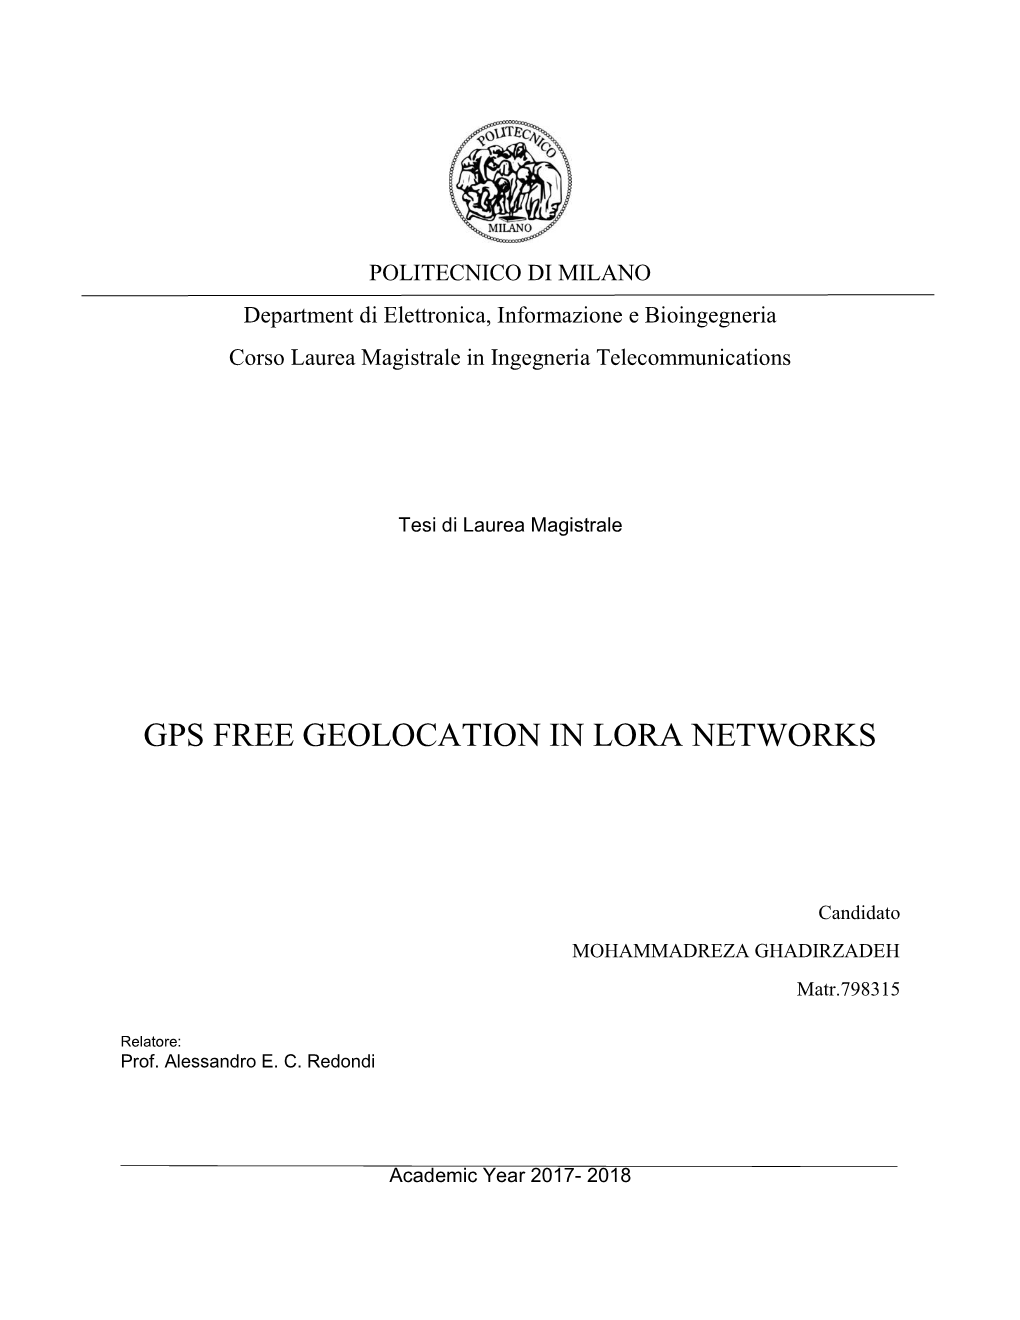 Gps Free Geolocation in Lora Networks